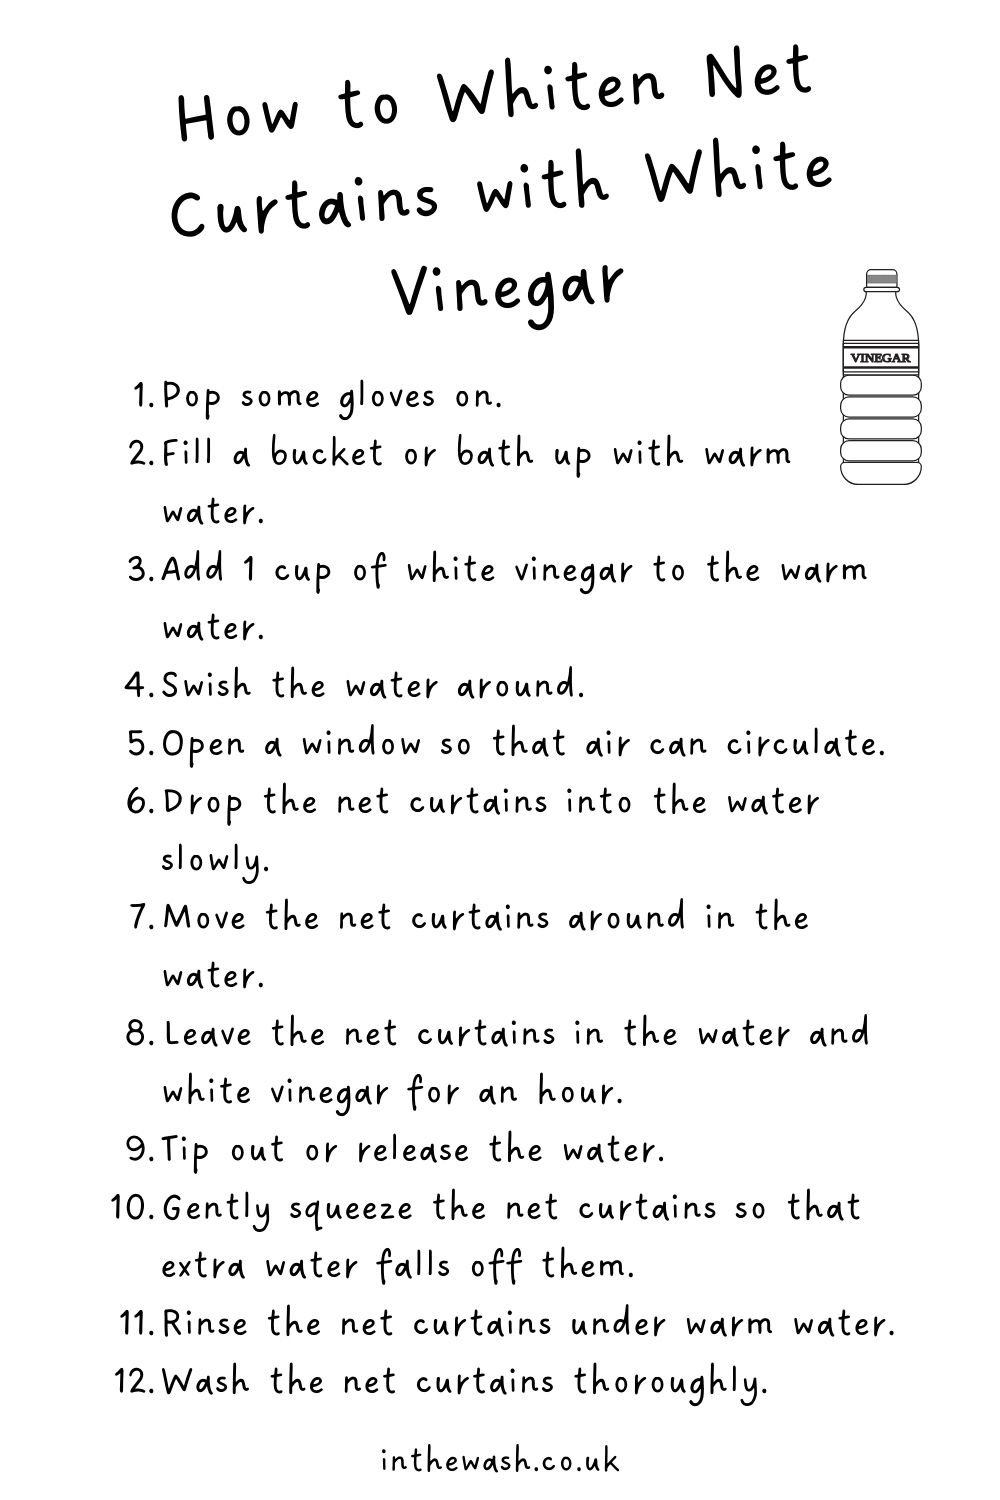 How to whiten net curtains with white vinegar